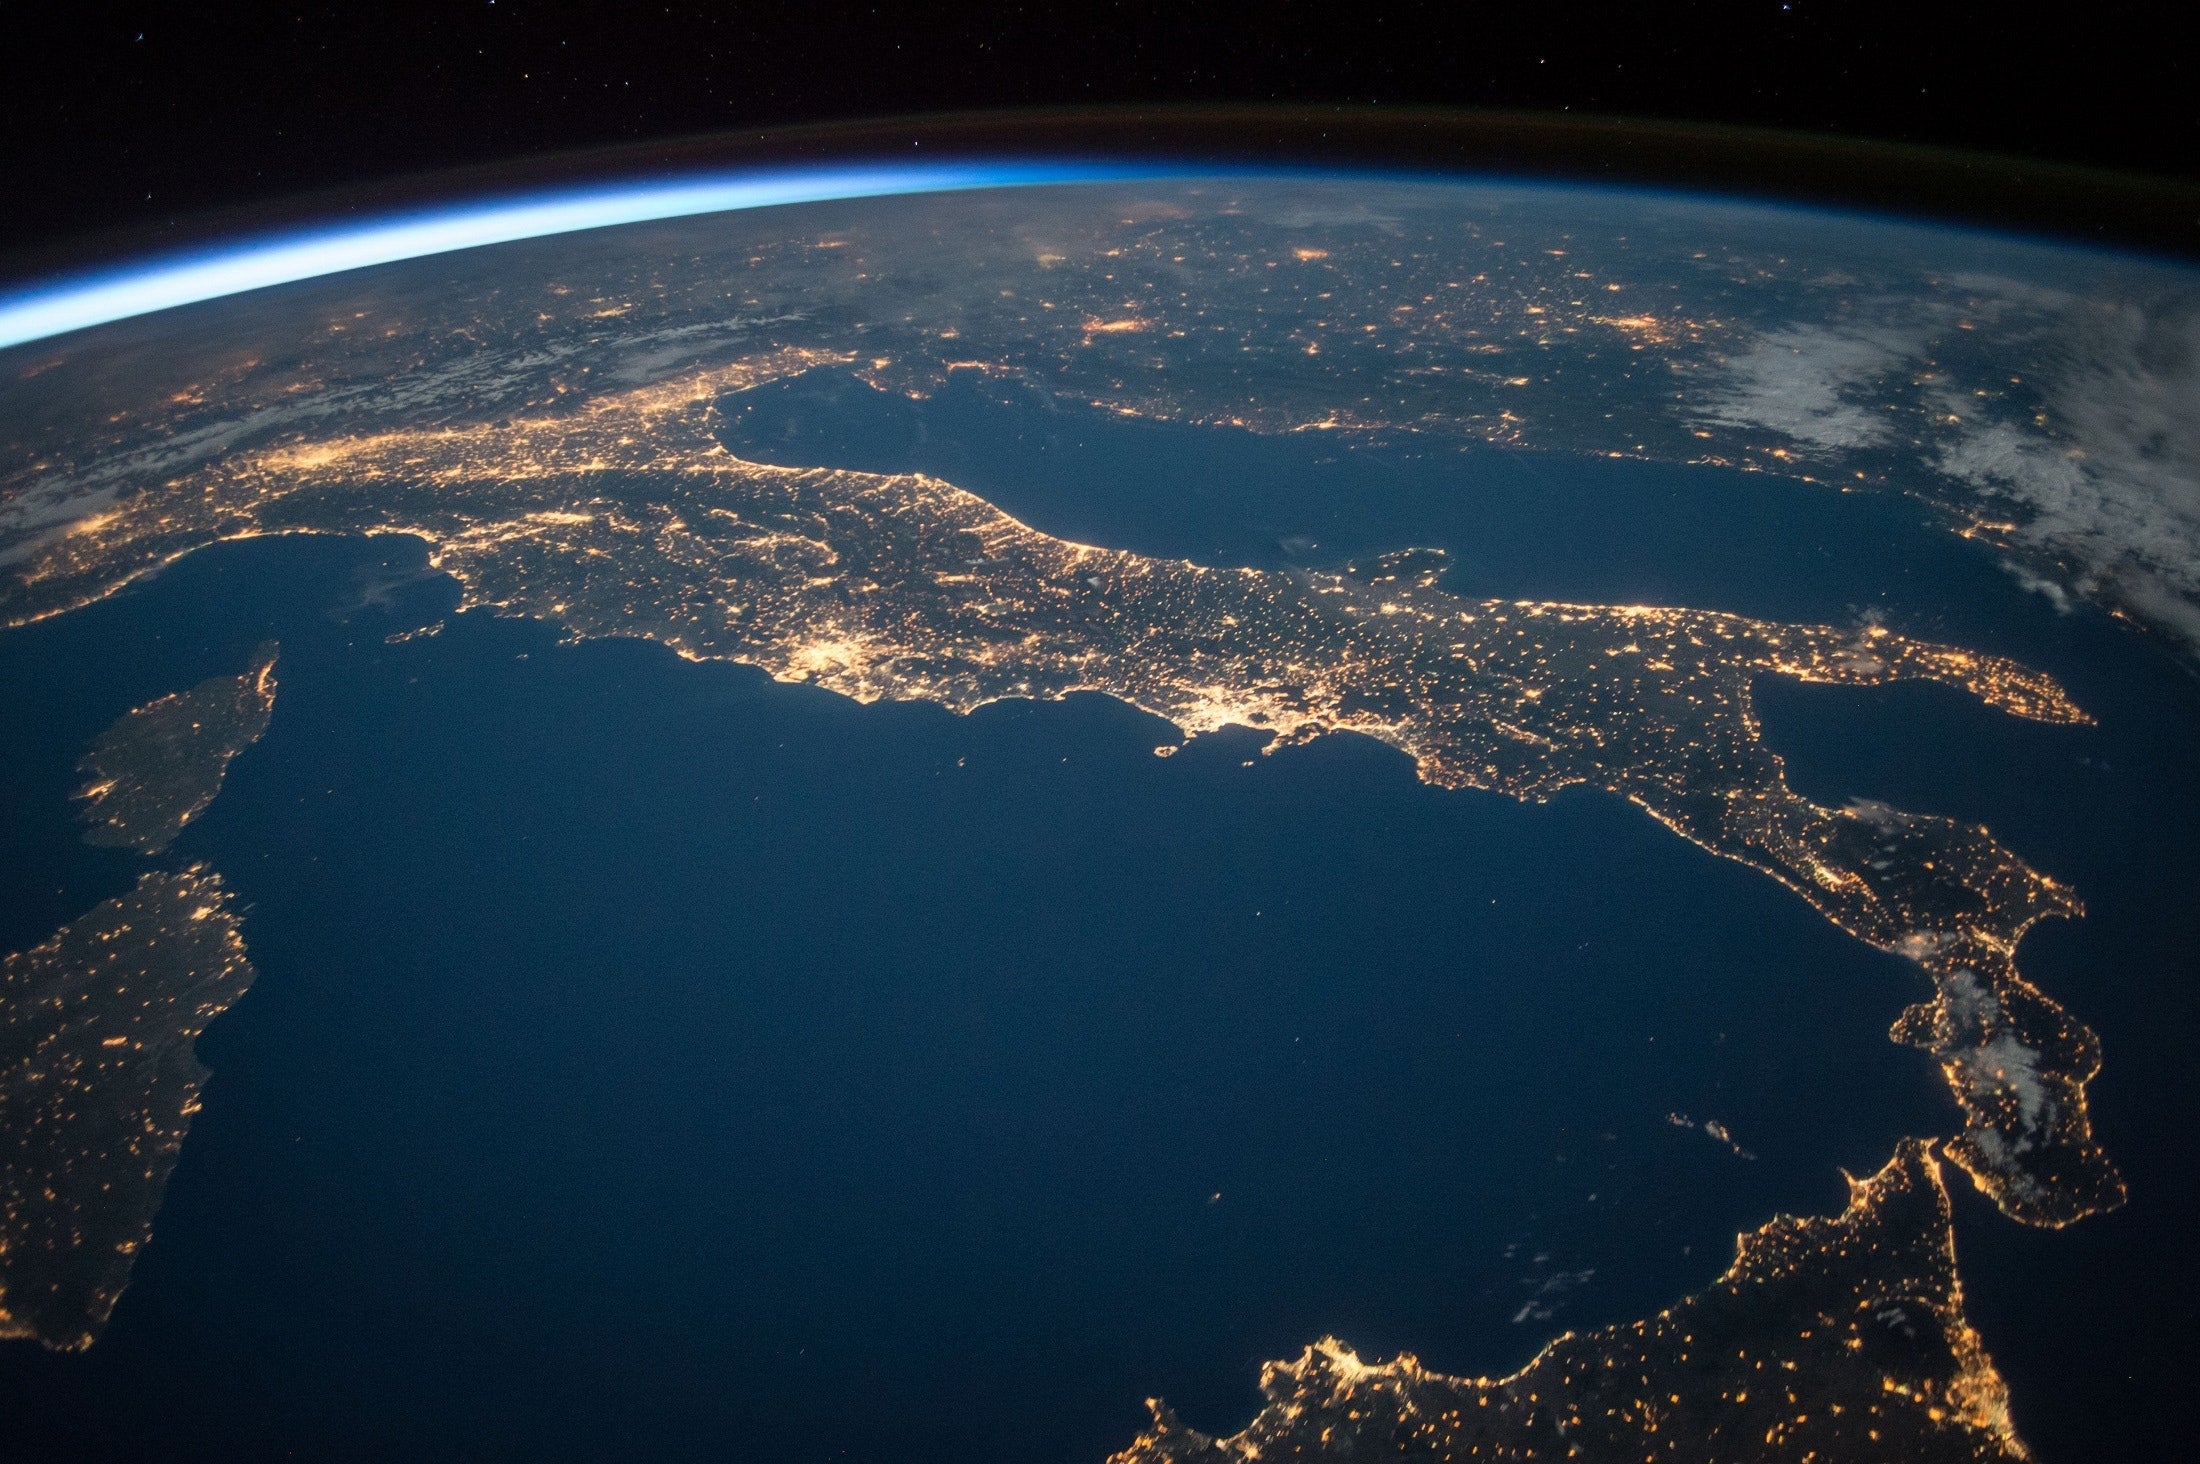 A picture taken from space of Earth, specifically the Italian peninsula at night, representing the distributed network that comes with edge computing and edge caching which load balances duplicative requests of static web content.